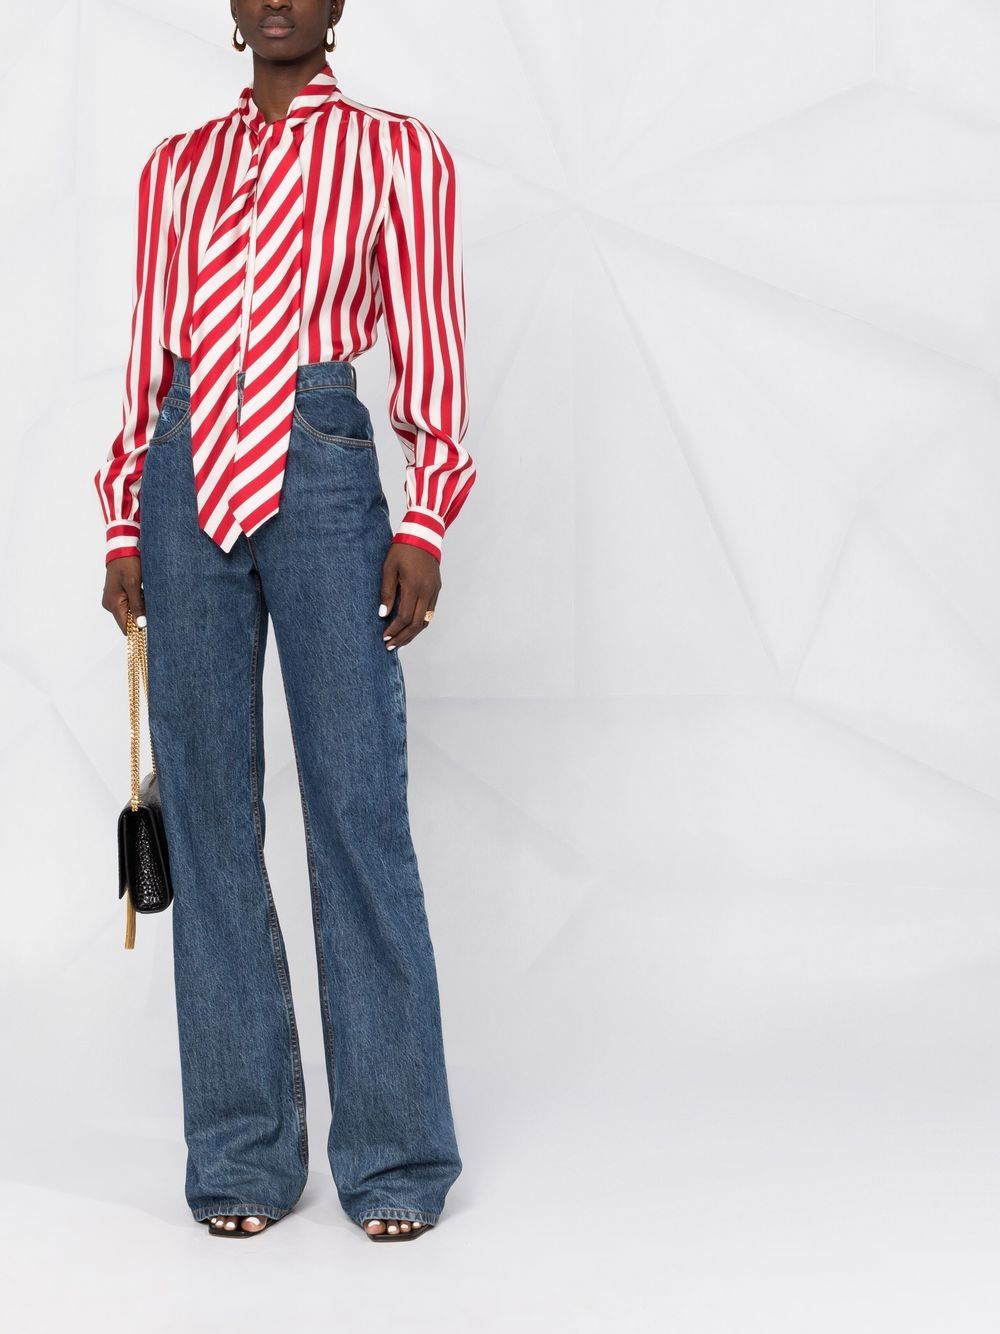 Cardinal Red pussybow striped shirt